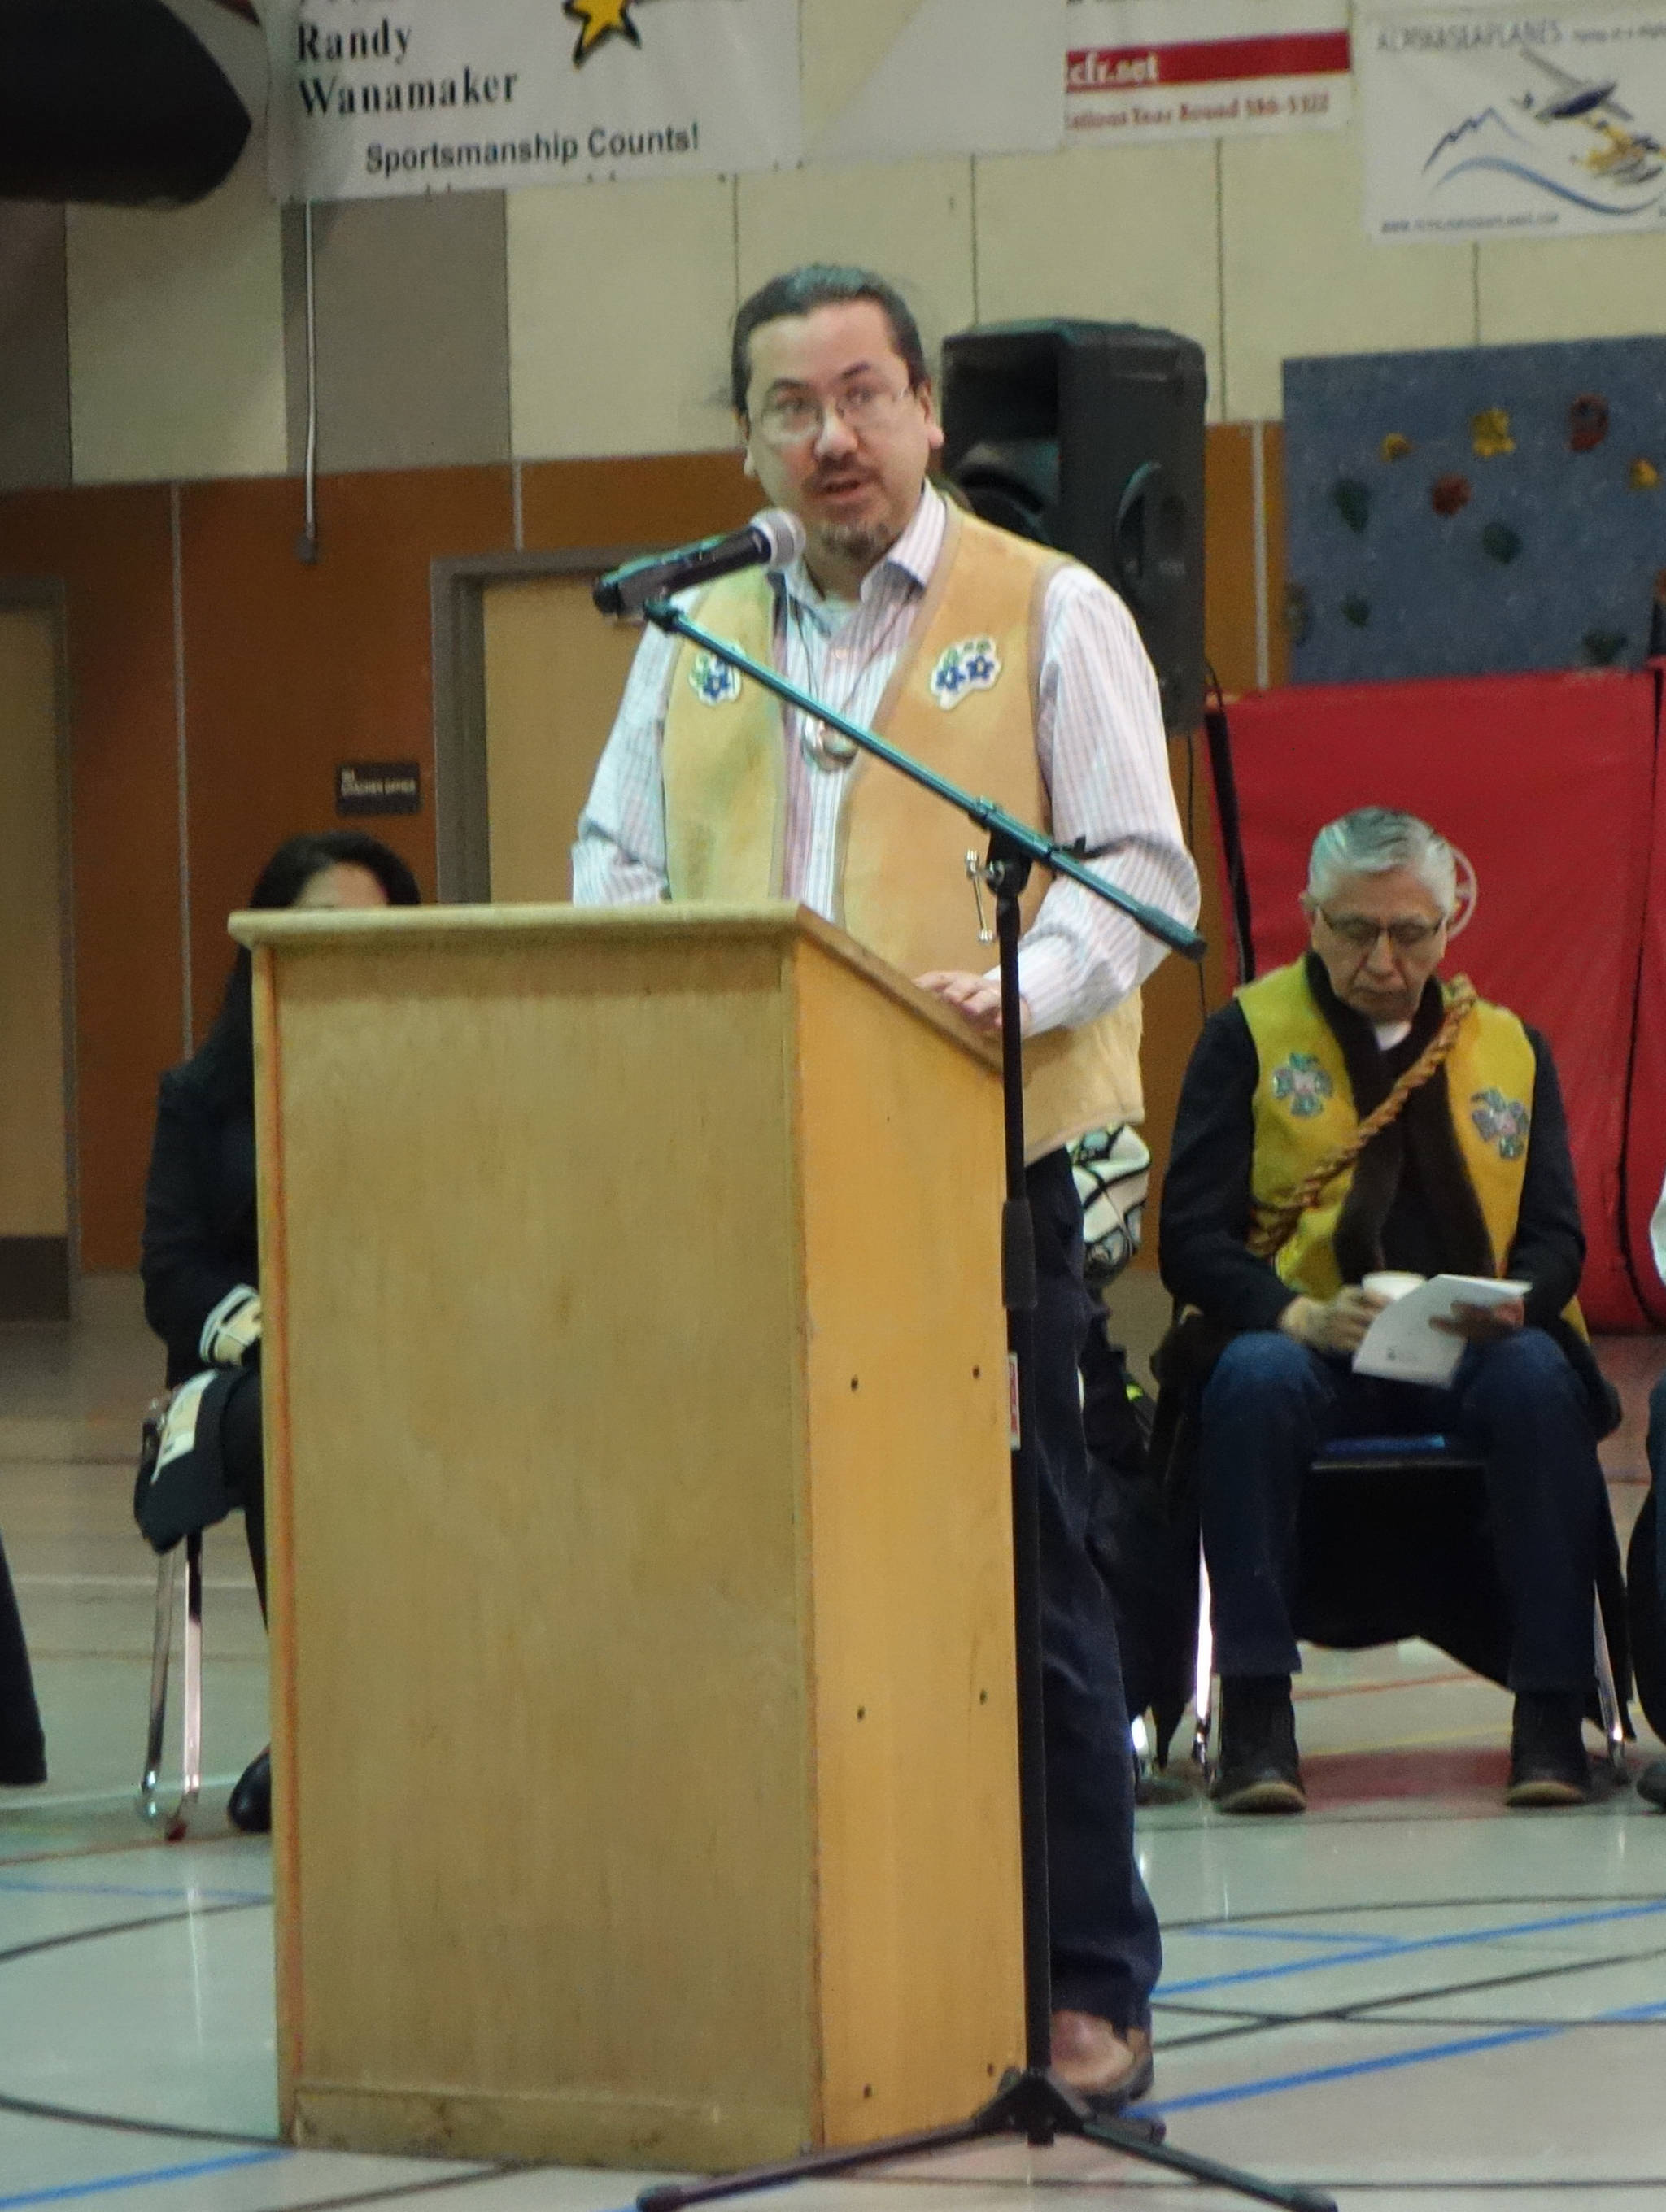 Sealaska Board of Directors Chair Joe Nelson of the Teikweidi Clan speaks at the “Transfer of Core Cultural Values Panels Ceremony” at Floyd Dryden Middle School on Wednesday, Nov. 22. (Clara Miller | Capital City Weekly)